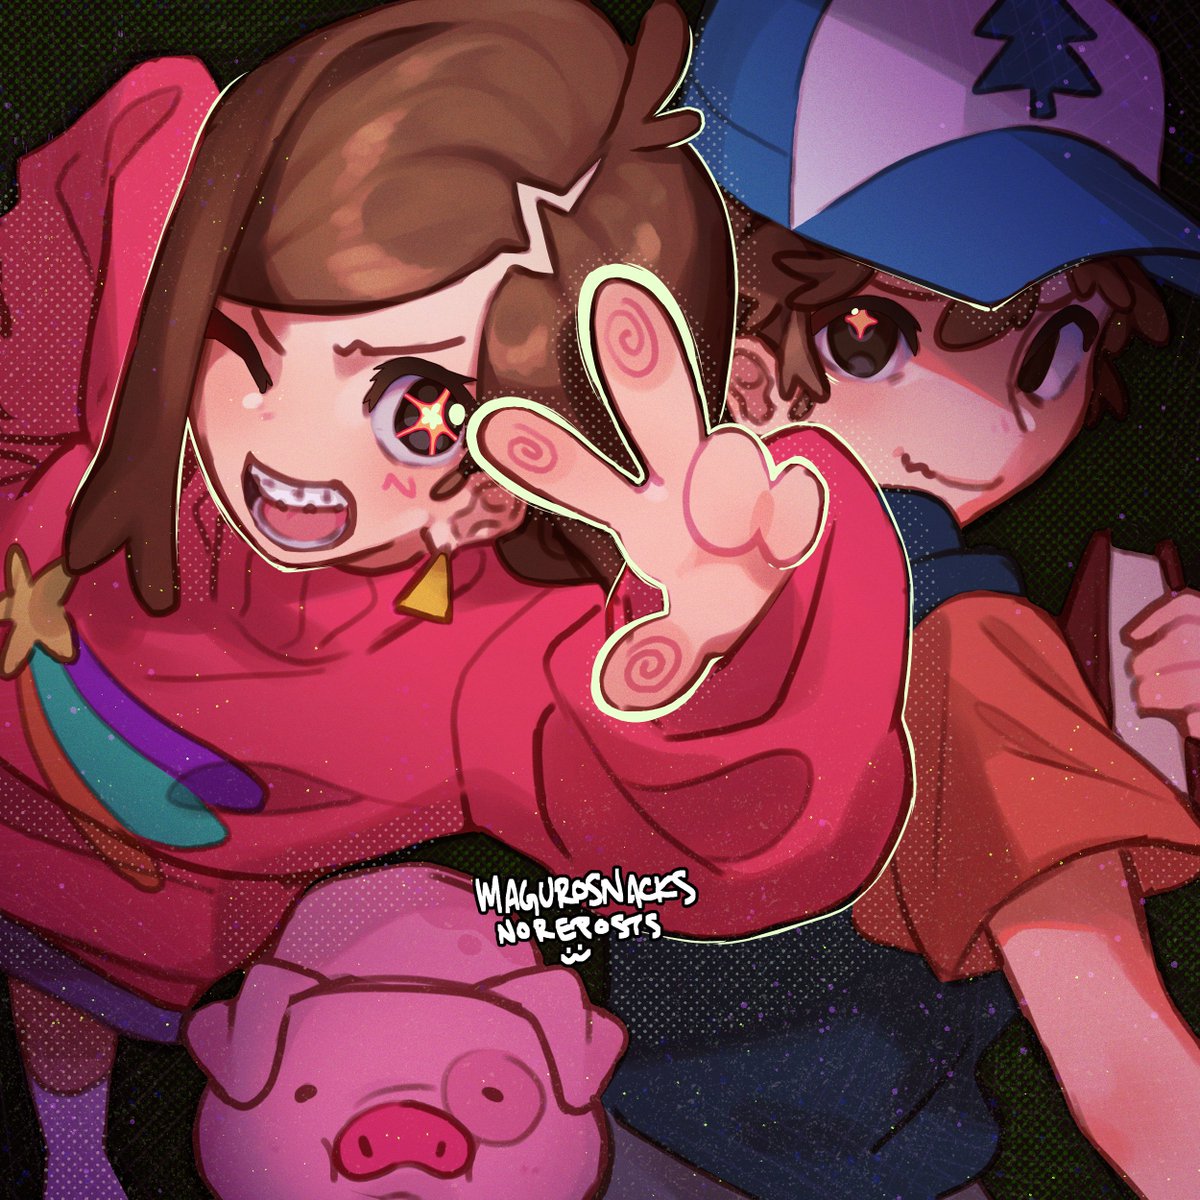 MYSTERY TWINS 🌲
#gravityfalls #mabelpines #dipperpines